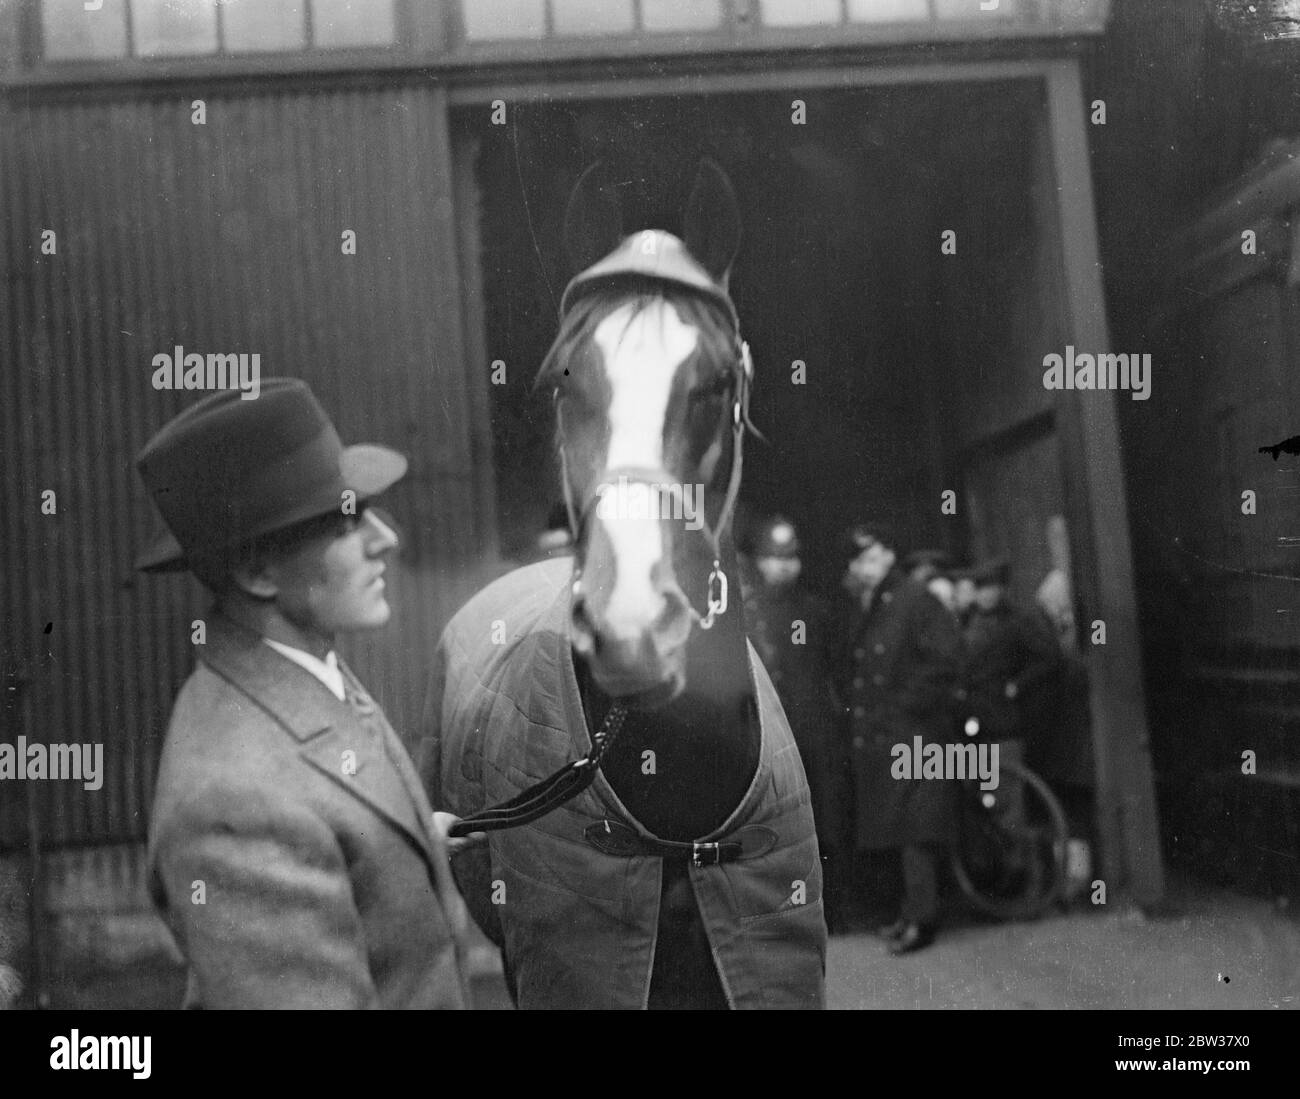 American contender for Ascot Gold Cup arrives - brought by Mr A C Bostwick . Mr A C Bostwick , the elder of the Bostwick brothers , who has ridden in Britain with success under National Hunt Rules arrived at Southampton aboard the  Berengaria  . He brought with him his Ascot Gold Cup horse ,  Mate  .  Mate  has won many of the important races in America and is considered one of the best horses sent to Britain from the States during the last decade . Photo shows ; Mr A C Bostwick with  Mate  on arrival at Southampton . 22 December 1933 Stock Photo